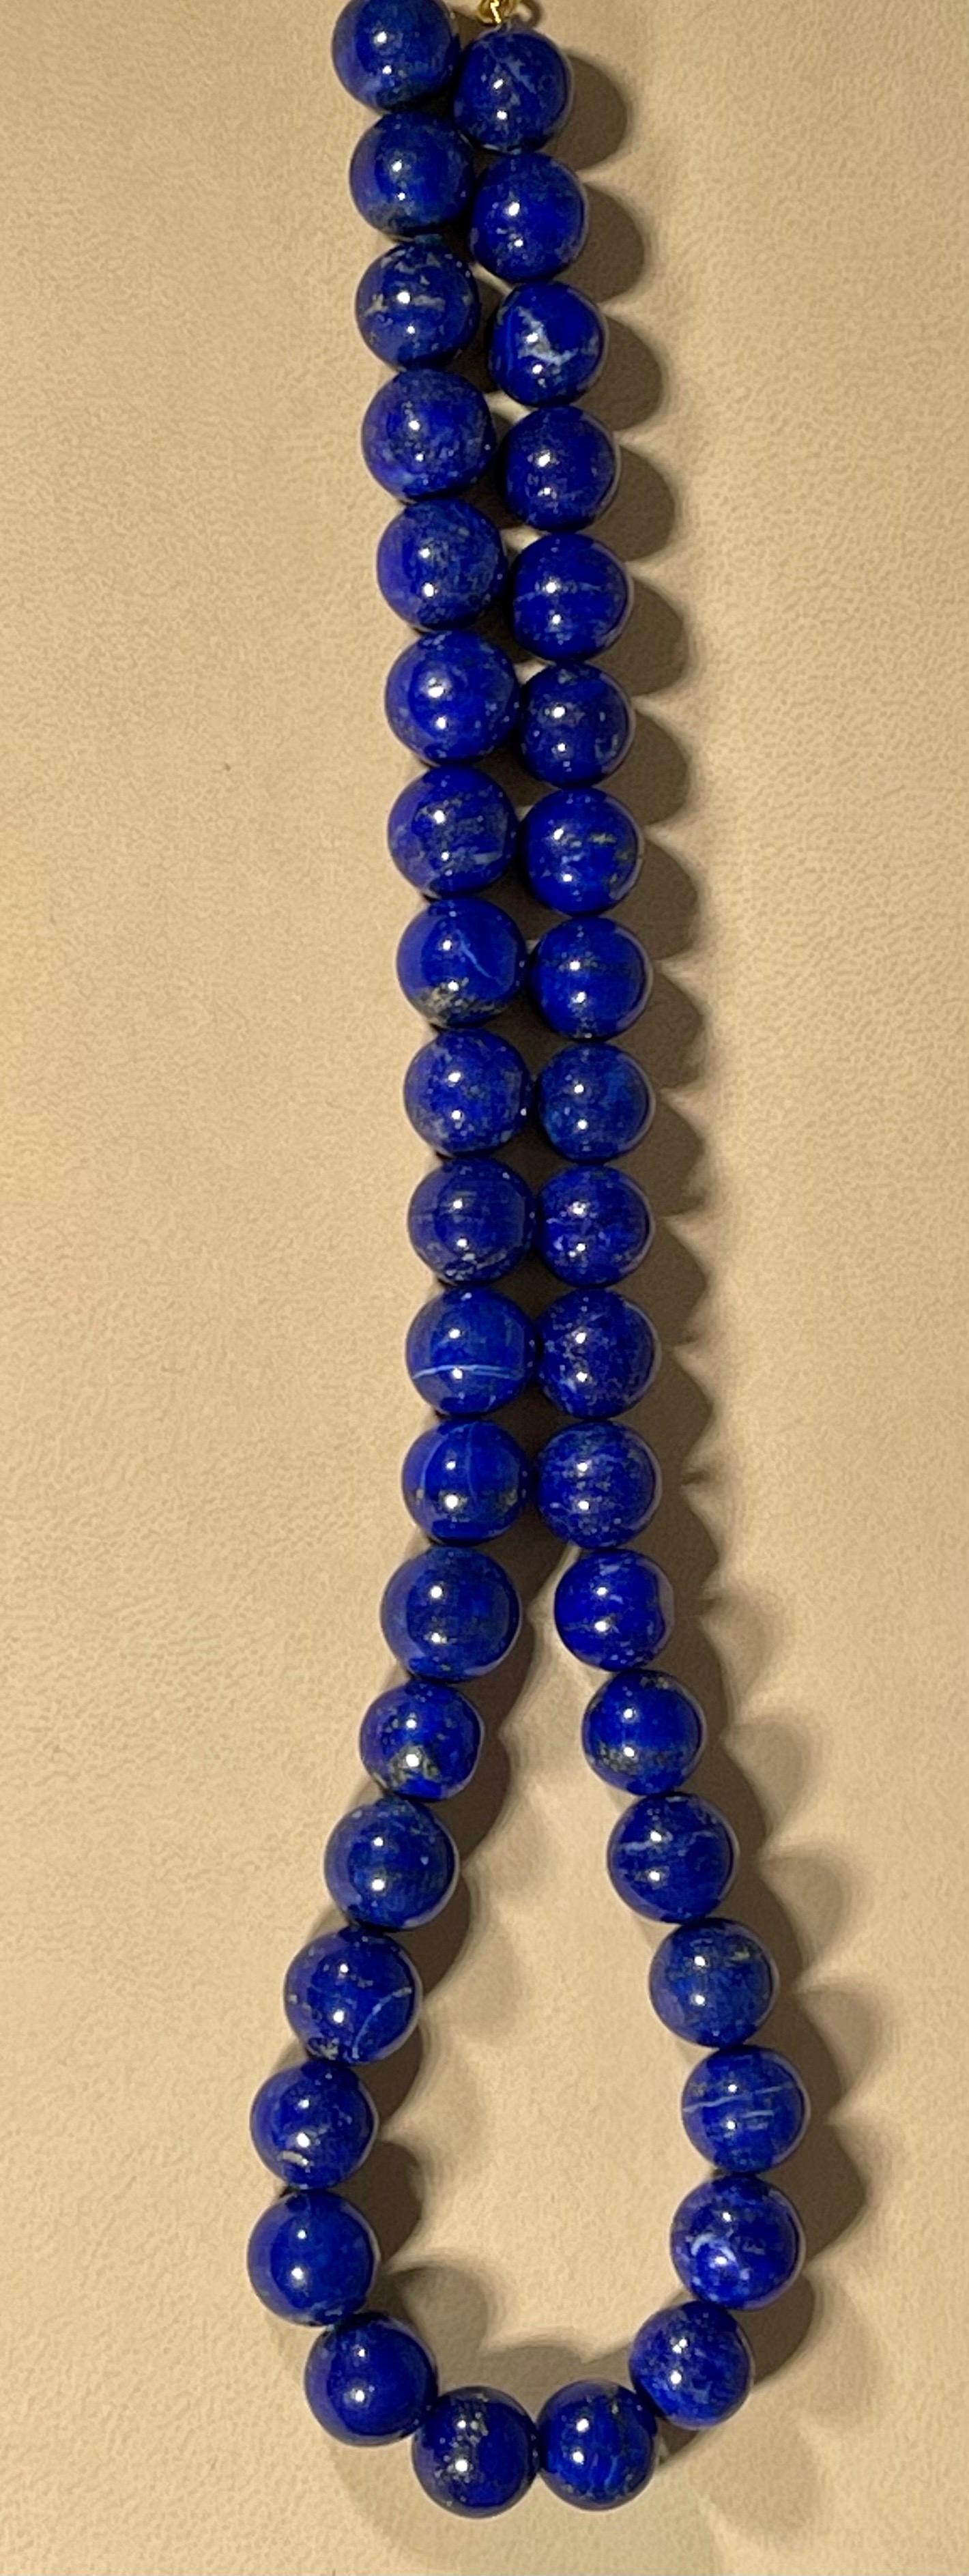 Women's Vintage Lapis Lazuli Single Strand Necklace with 14 Karat Yellow Gold Lobster For Sale